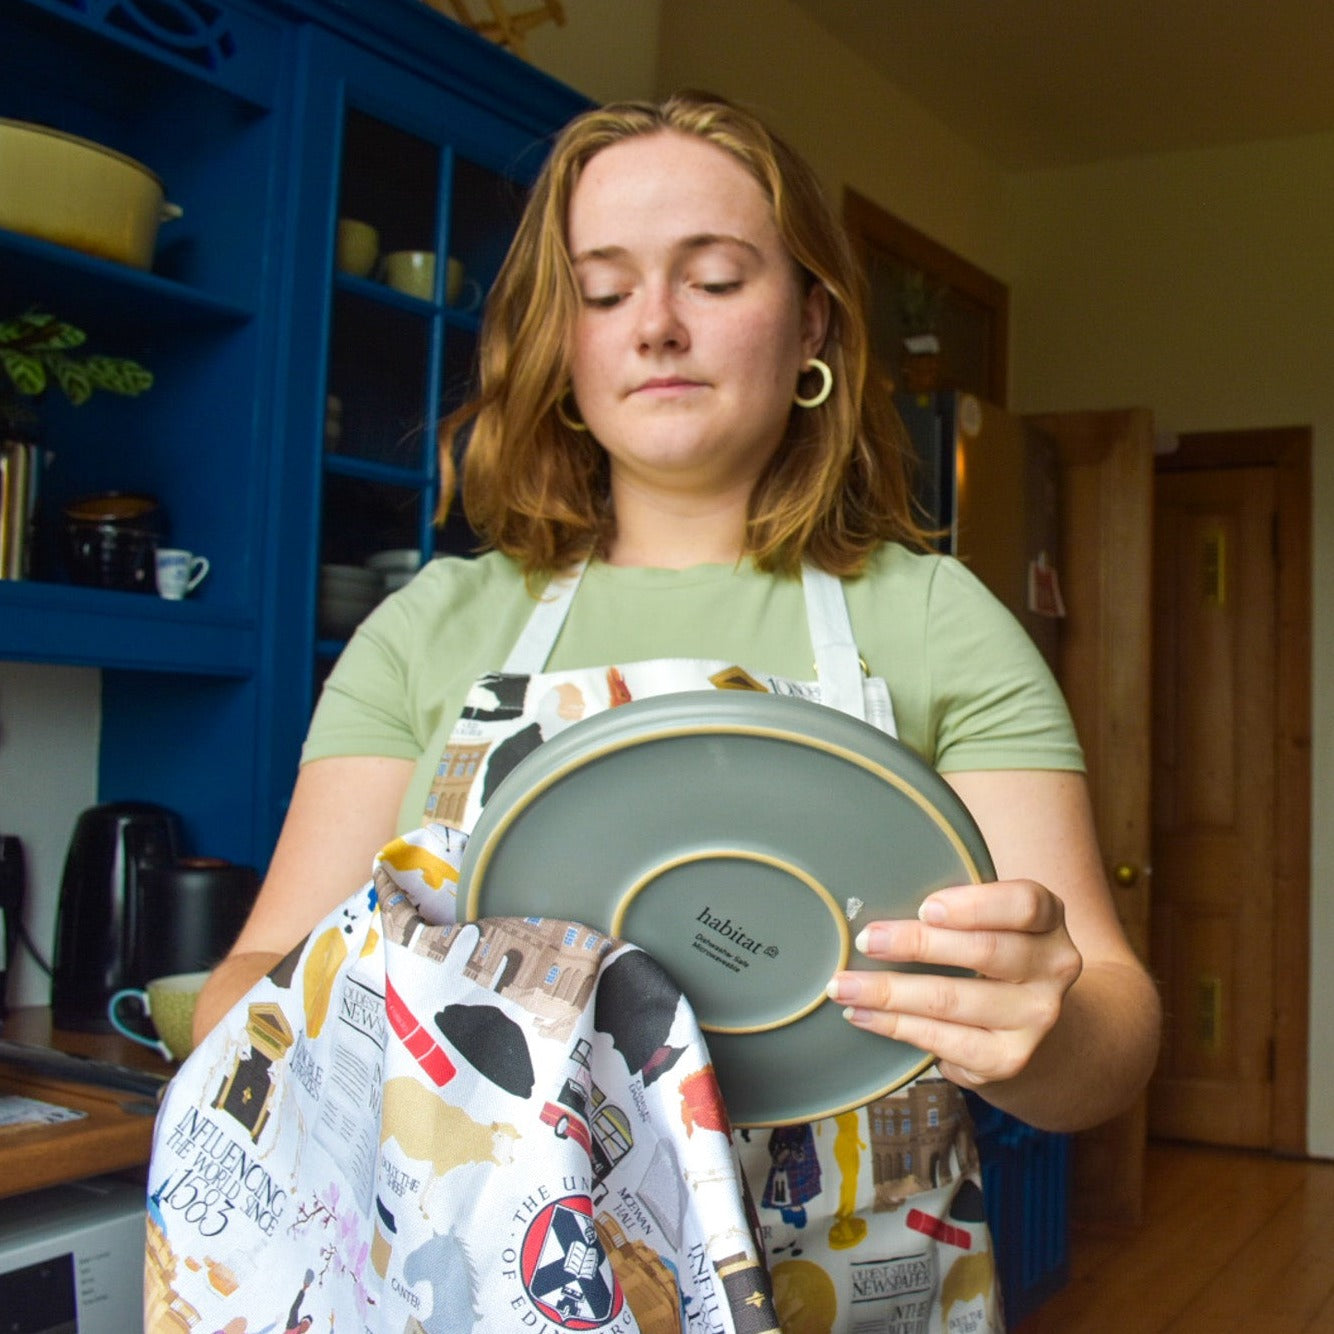 Model wears Heritage Collection Apron and uses Heritage Collection Tea Towel.